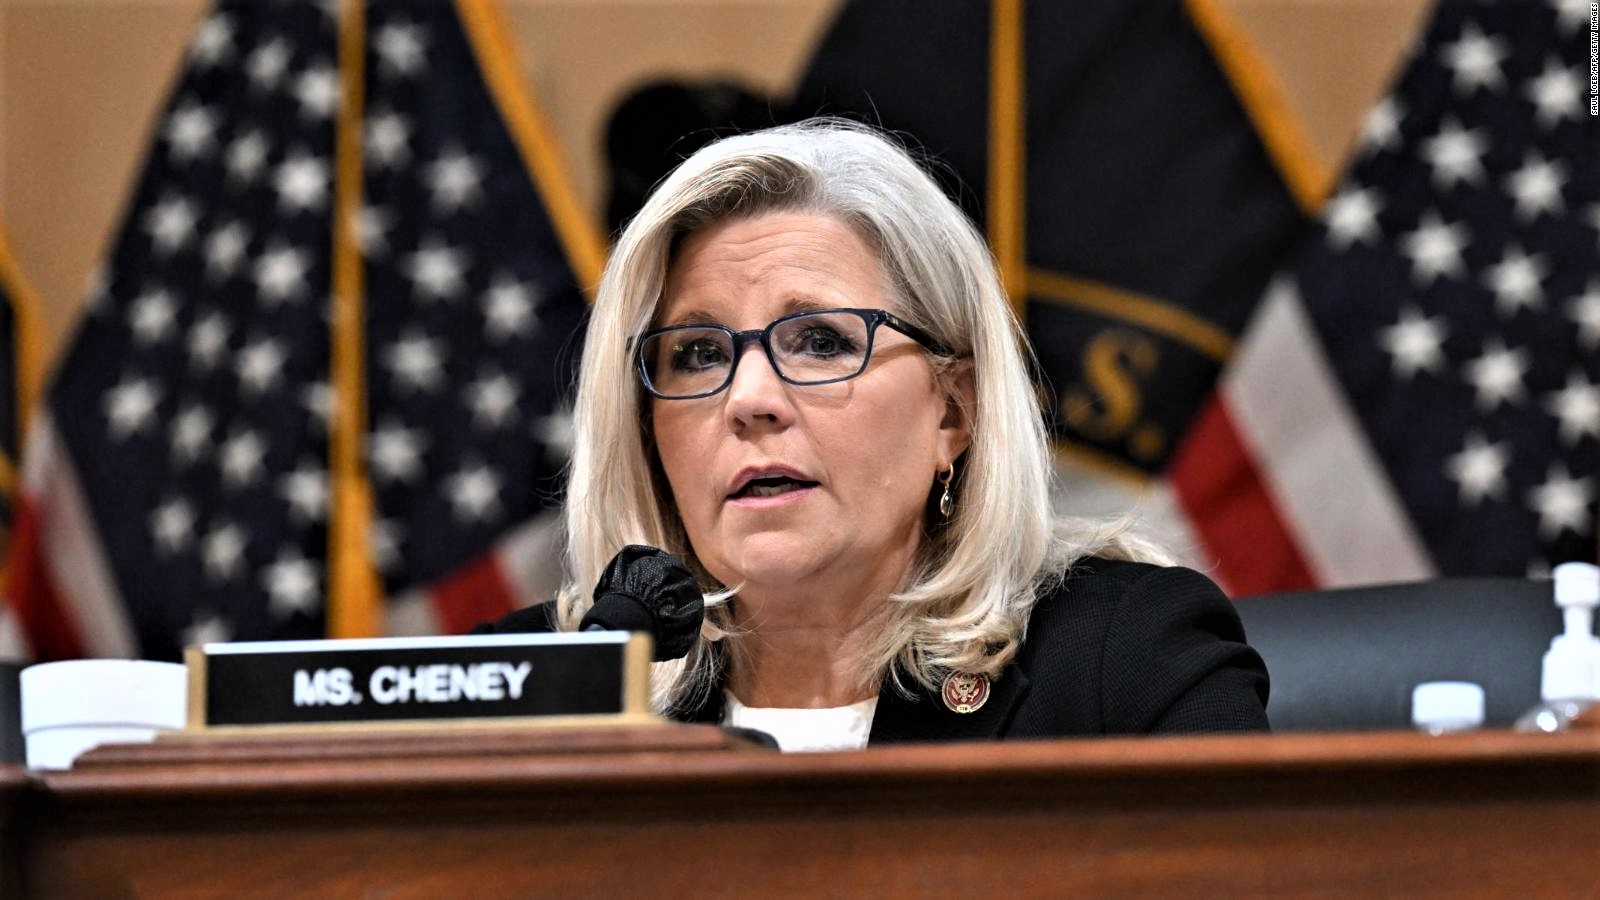 Featured image for “Liz Cheney, Conscience of the House”